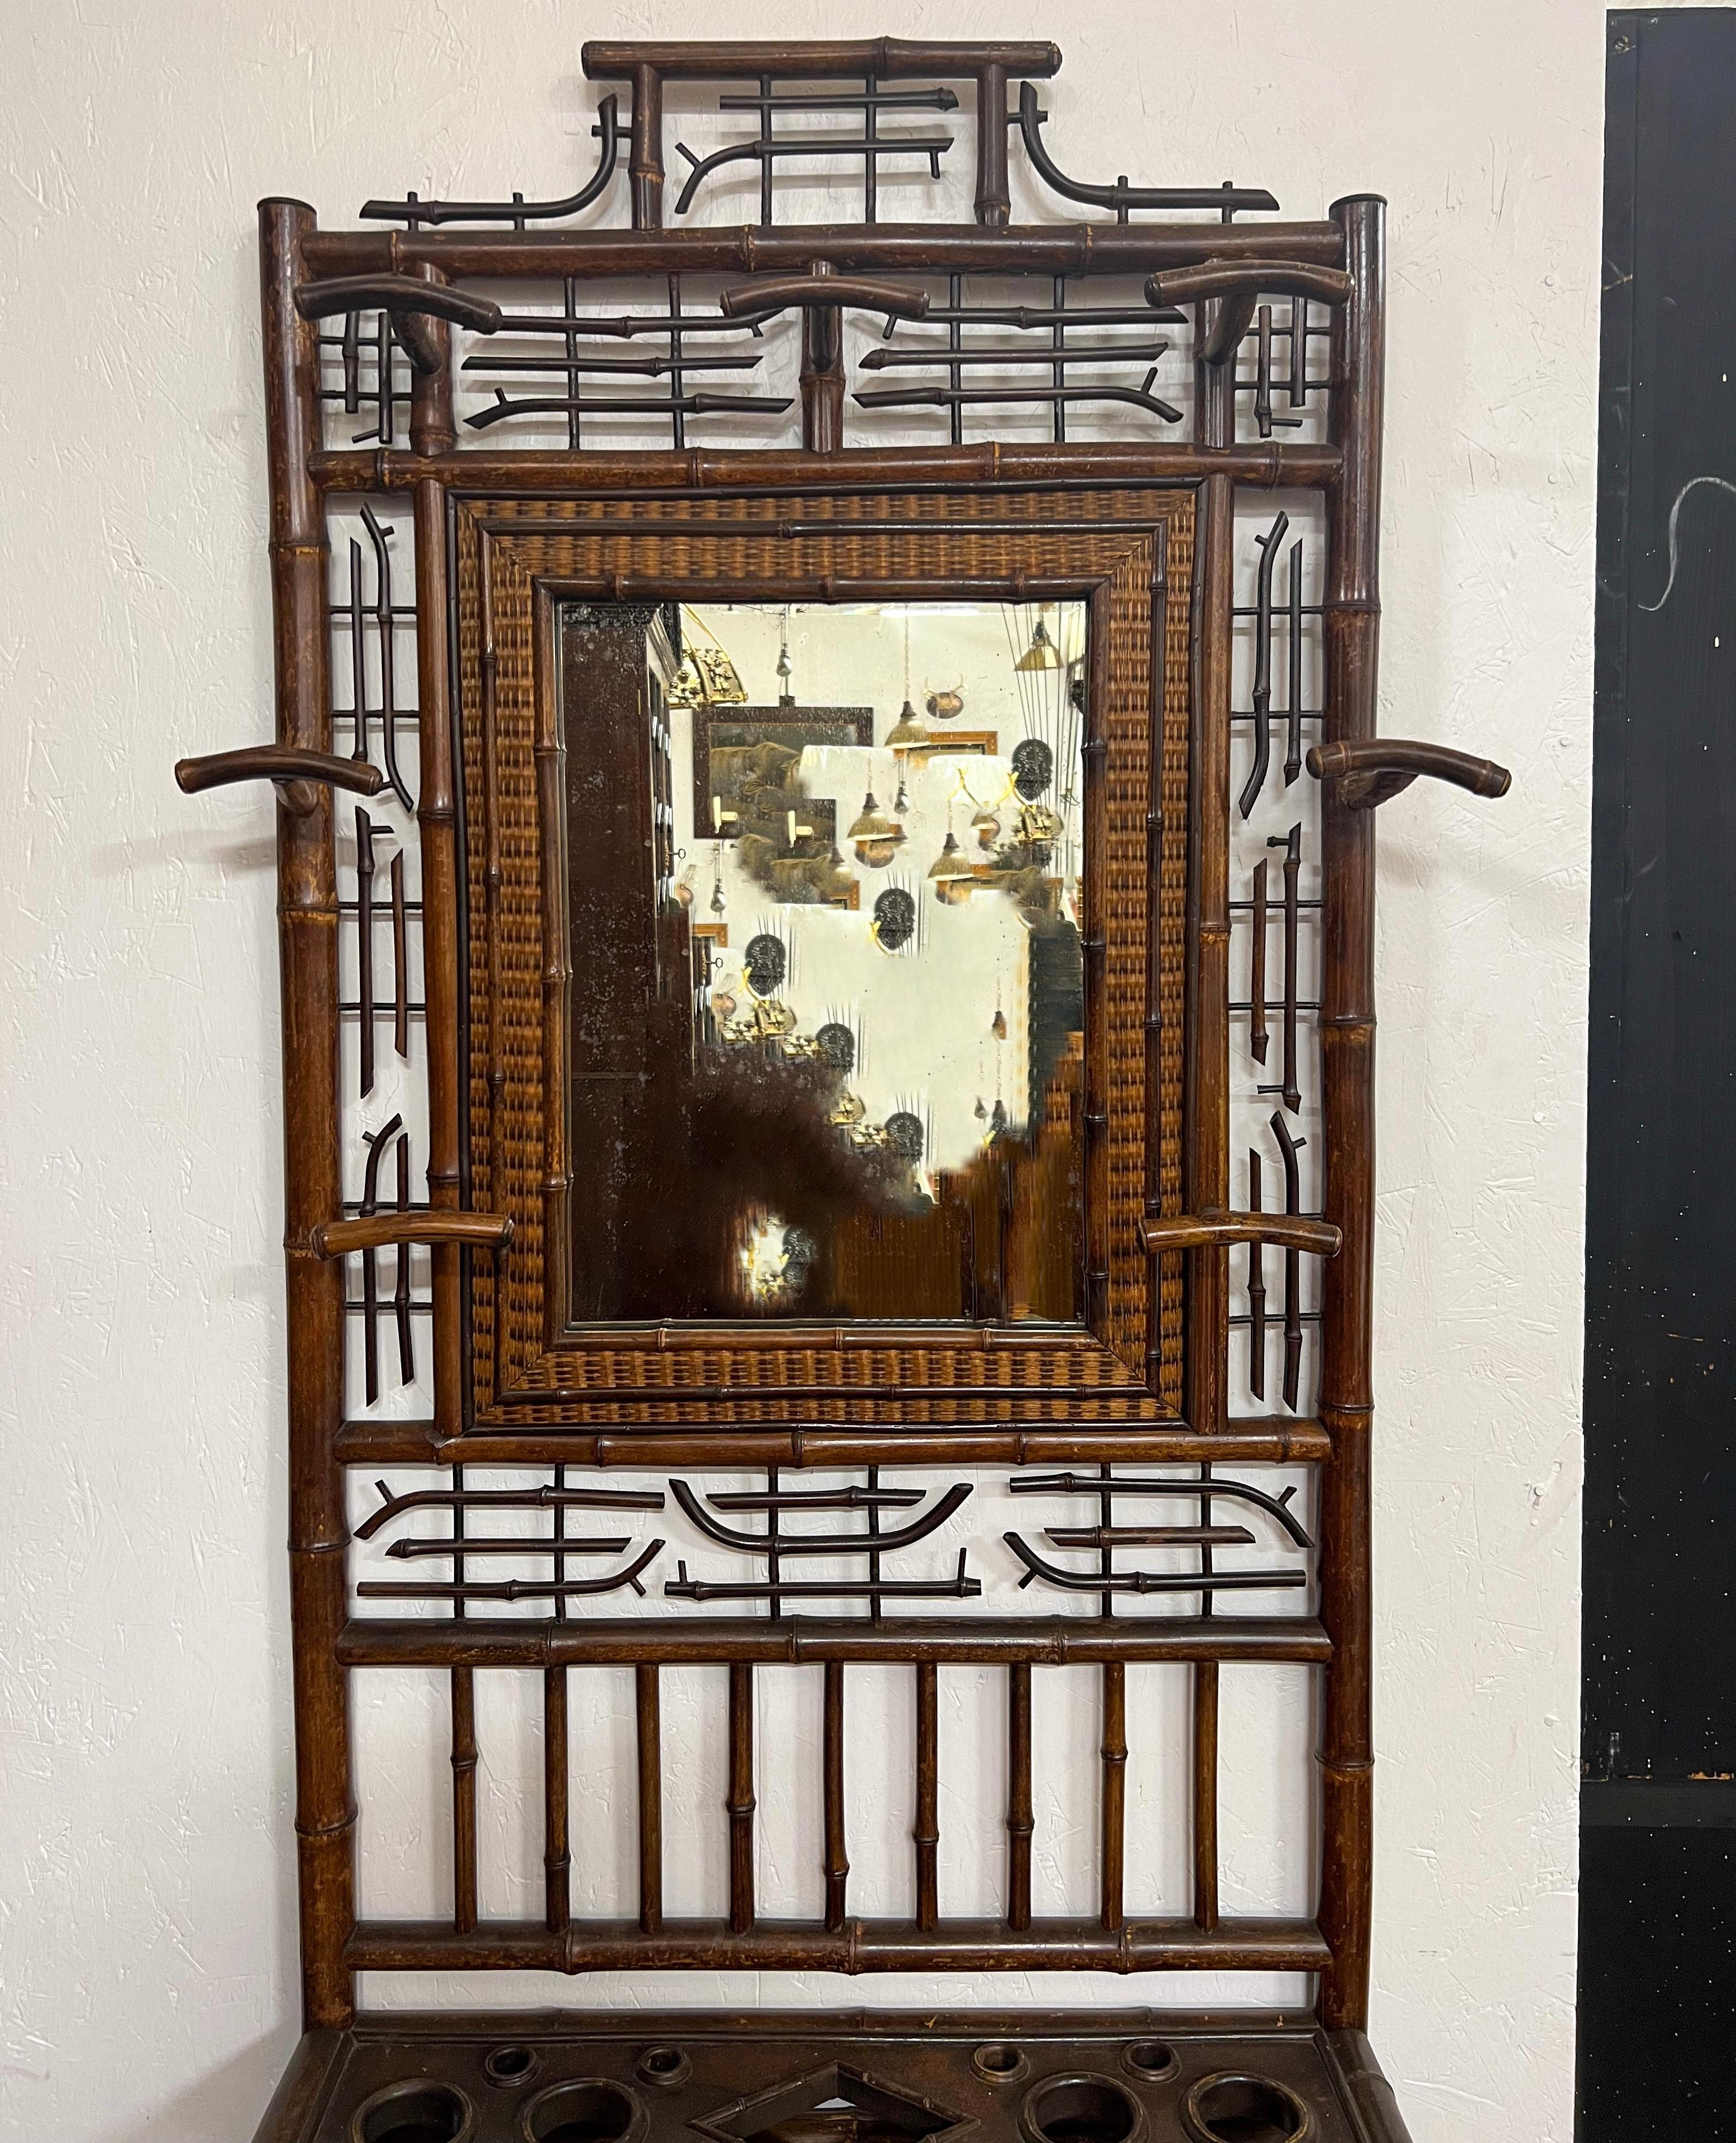 This is a 19th century burnt bamboo English hall tree. It has quite a few hooks for coats and hats , but also includes spaces for umbrellas! This one is in particularly good condition. The mirror does show wear but is without cracks.